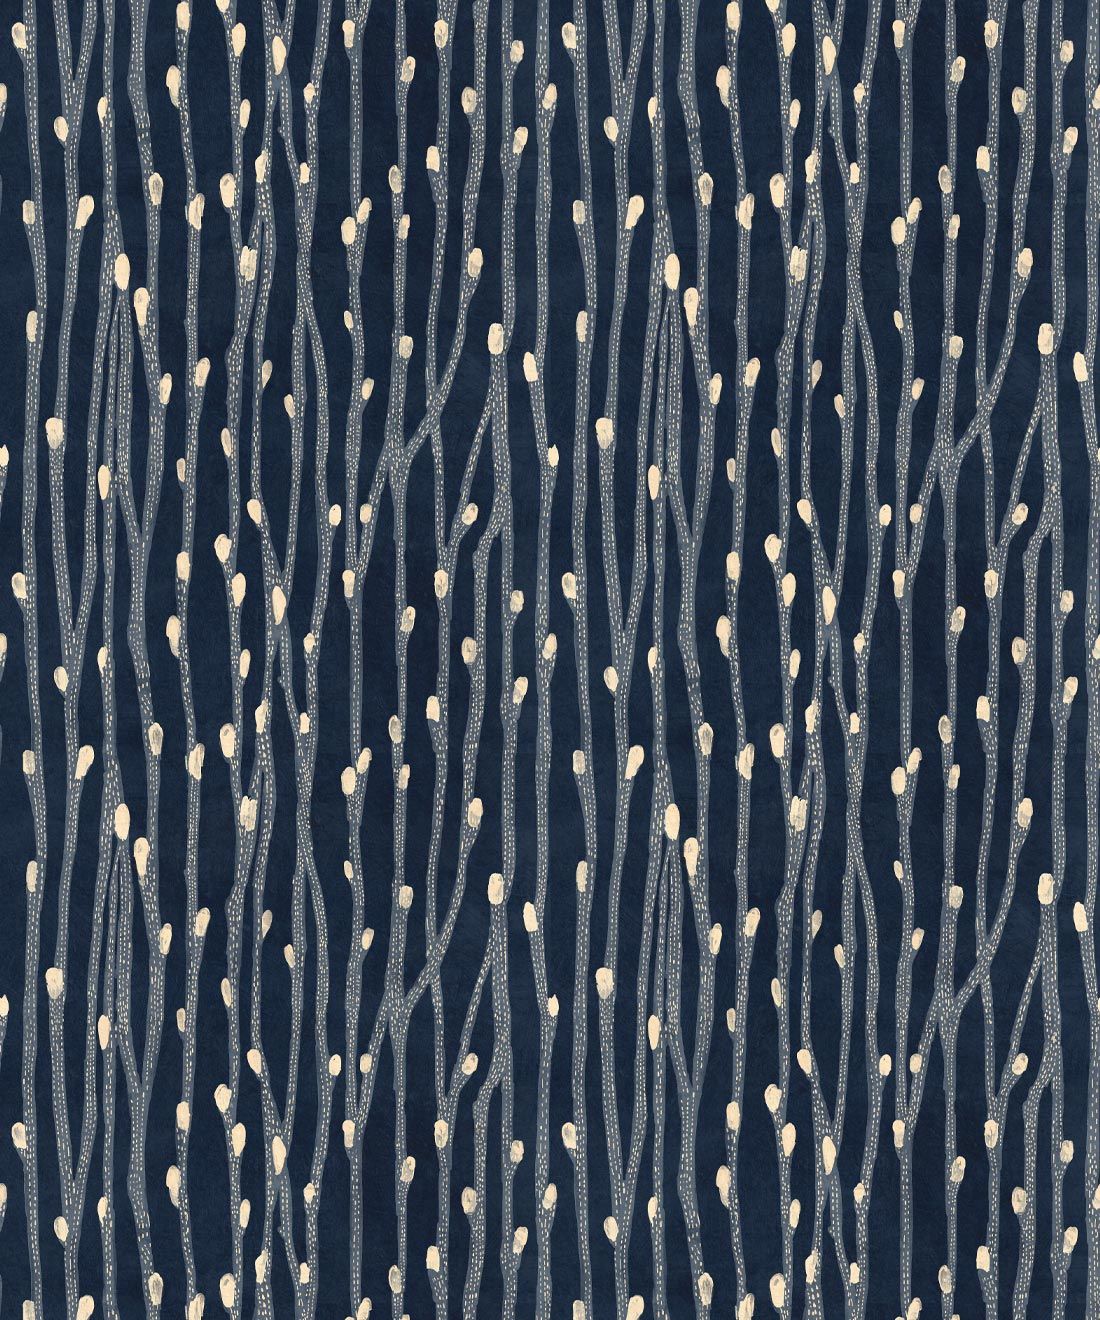 Pussy Willow Wallpaper • abstract botanical Wallpaper • Indigo • Swatch